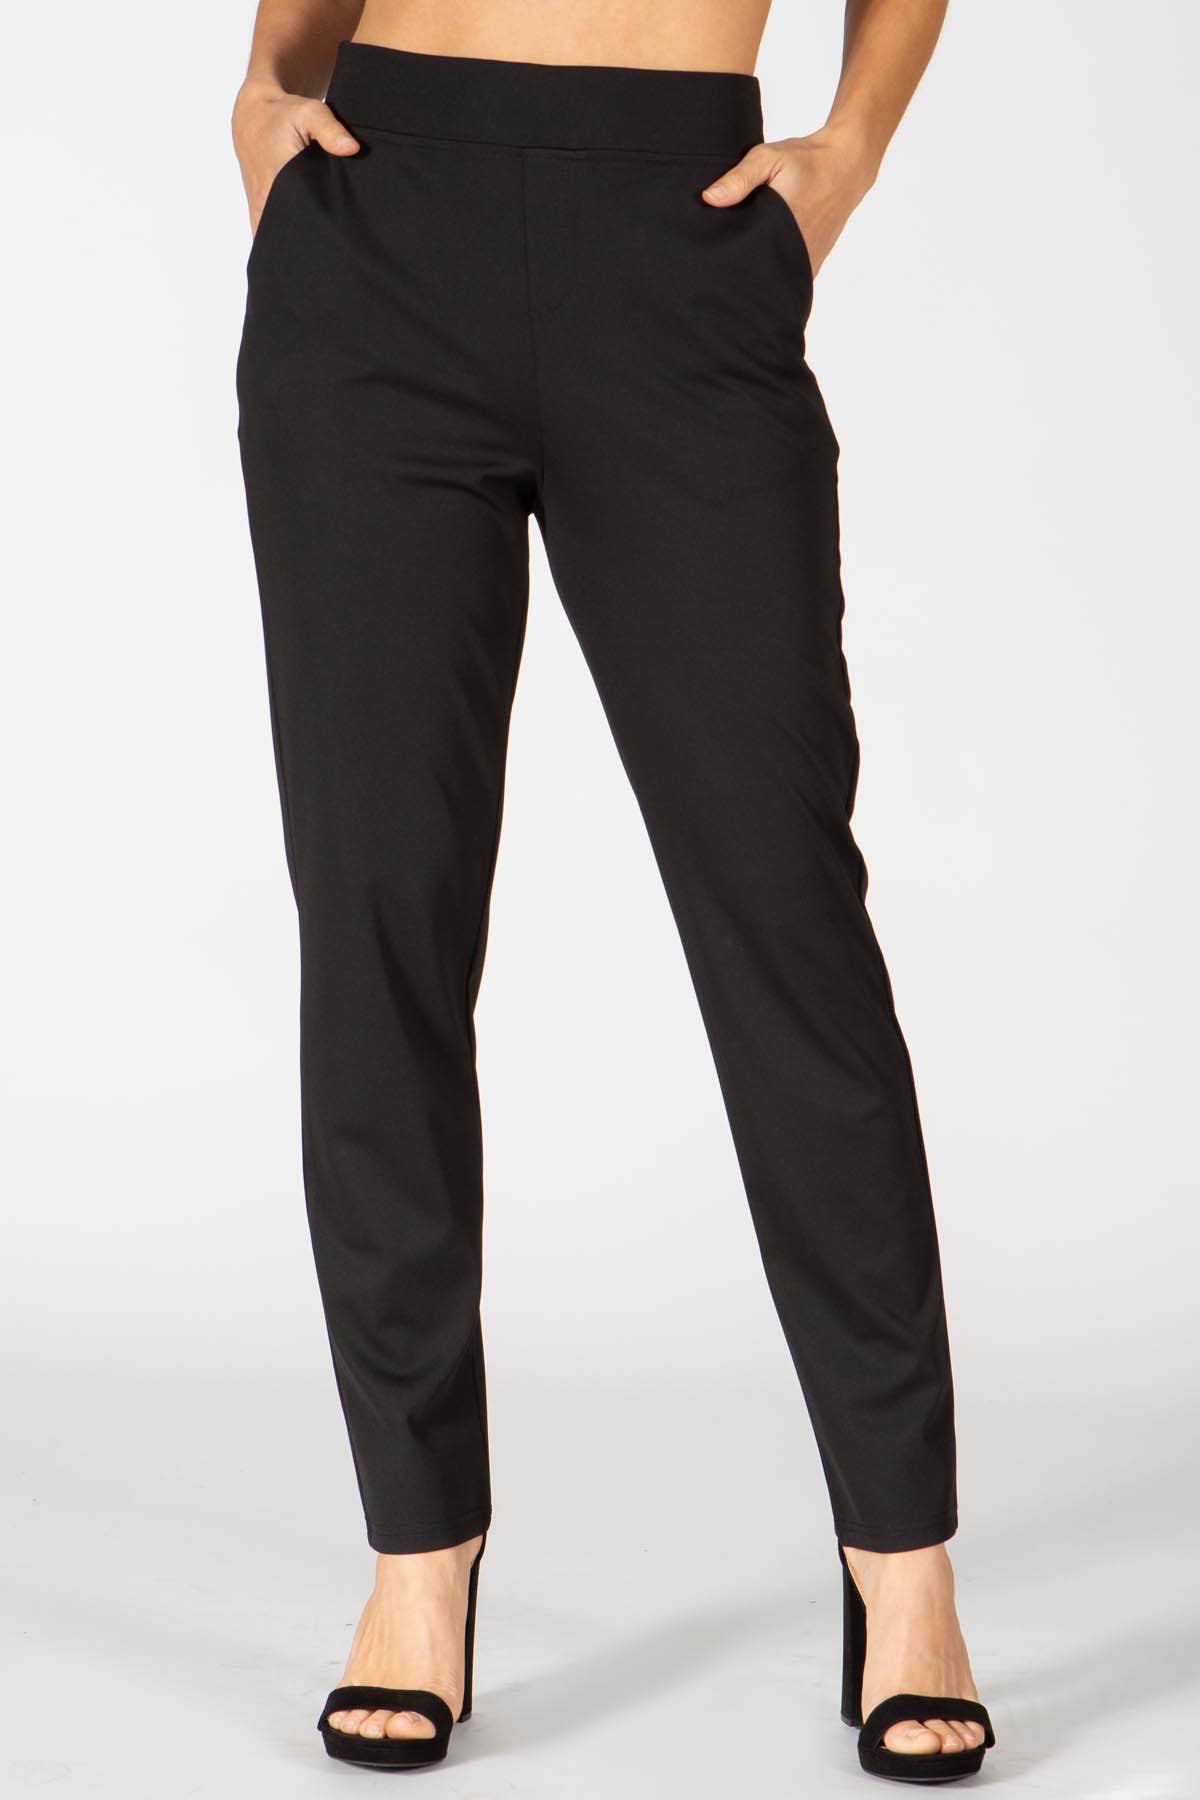 Women's Light Weight Ponte Pull-on Pants with back faux welt pockets.